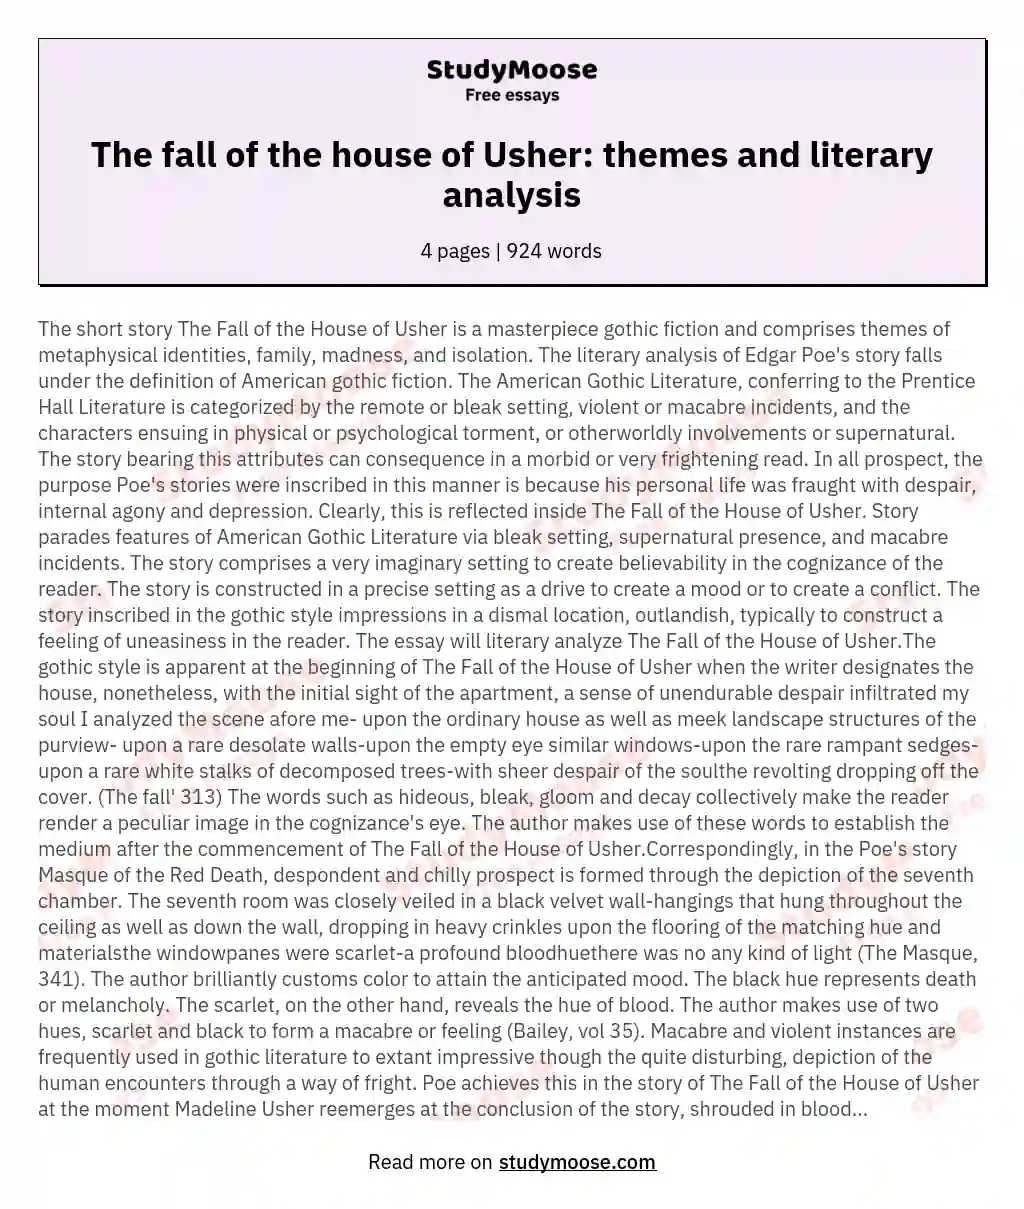 The fall of the house of Usher: themes and literary analysis